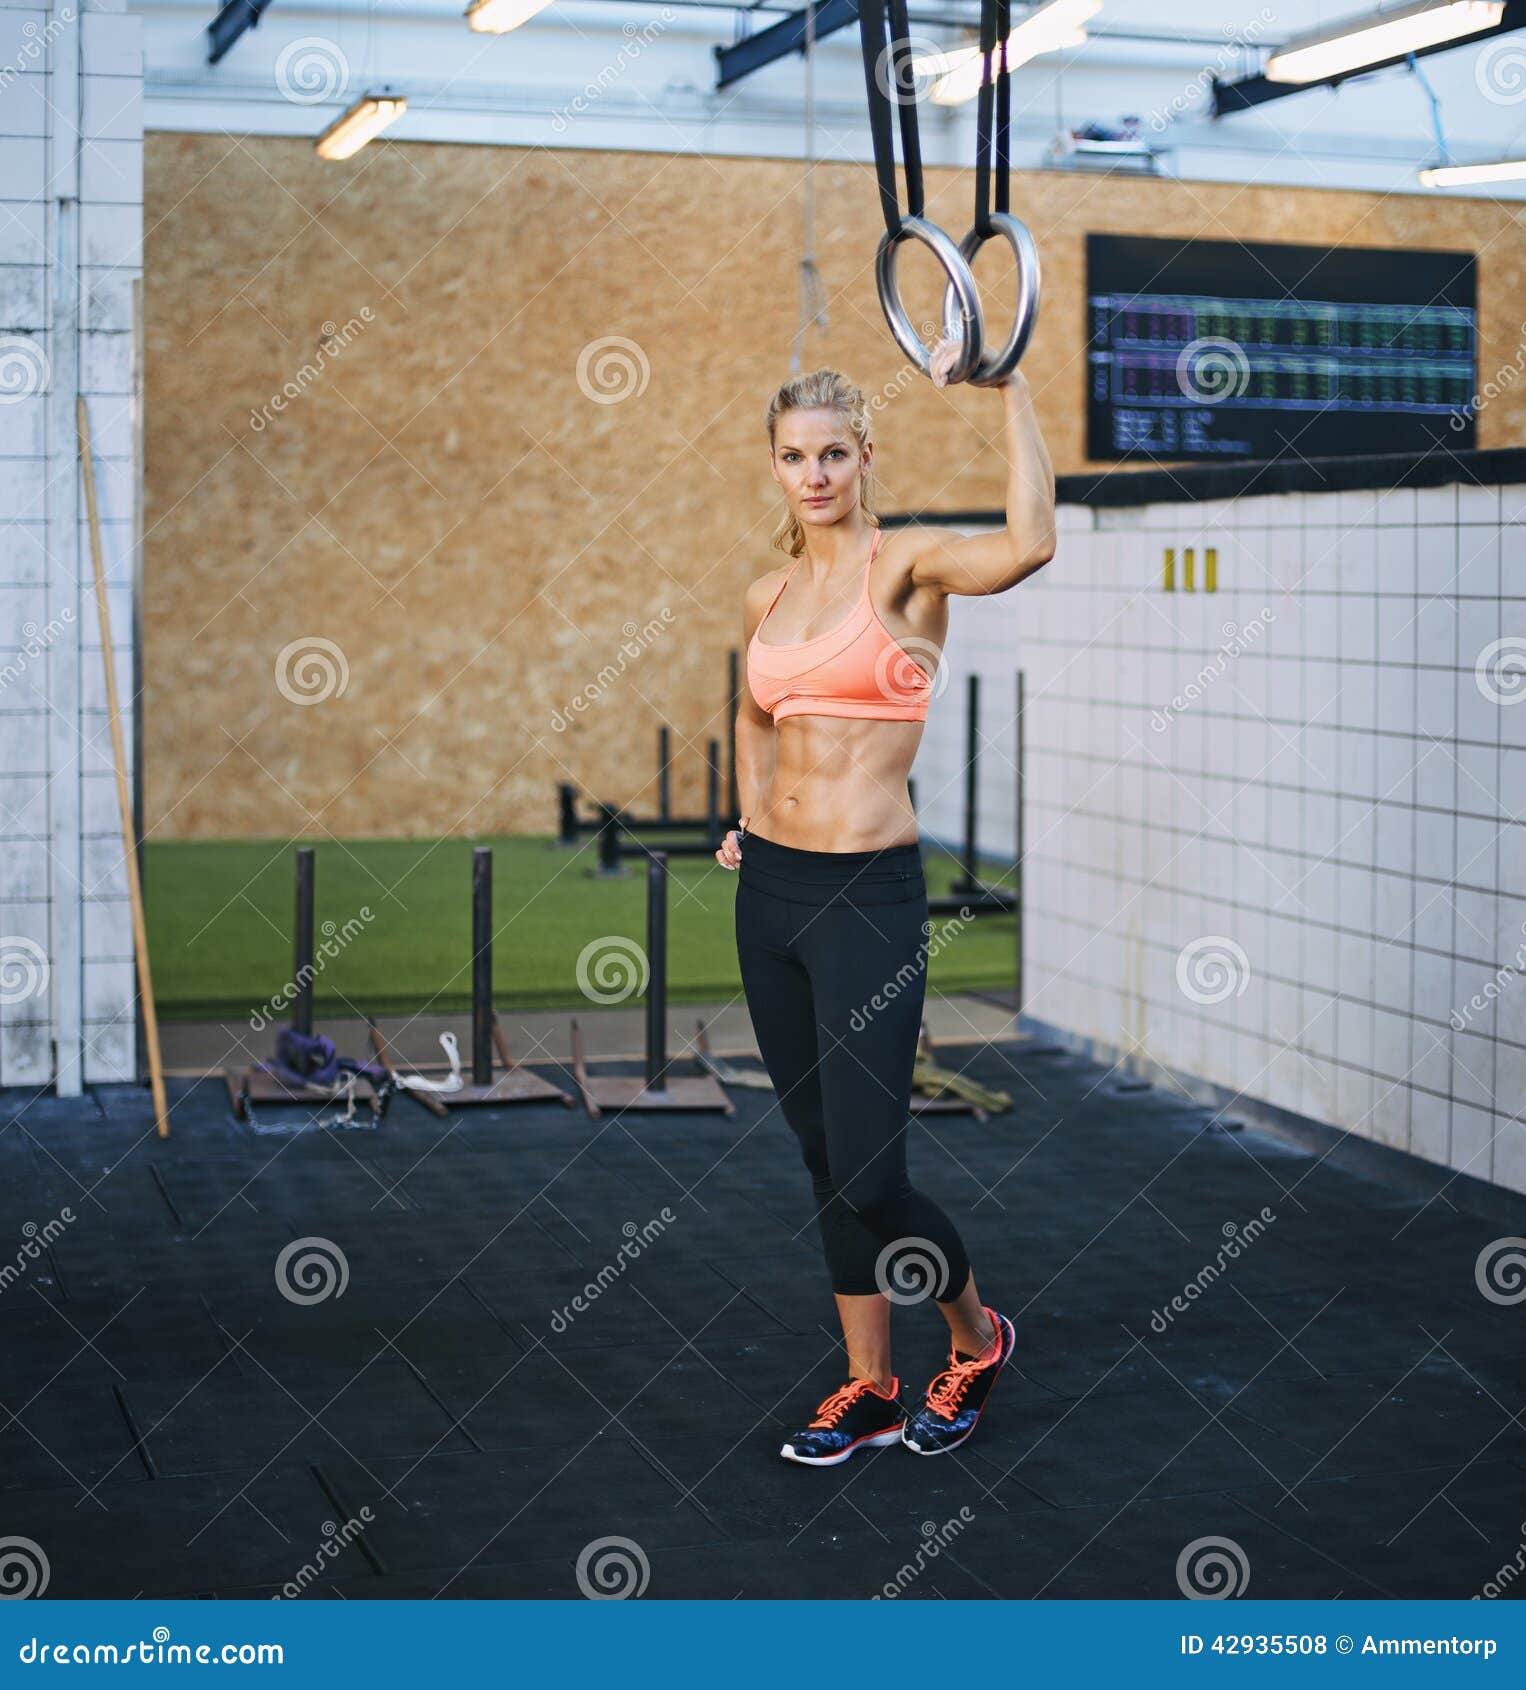 Working out Young athletic sportswoman exercising on gymnastic